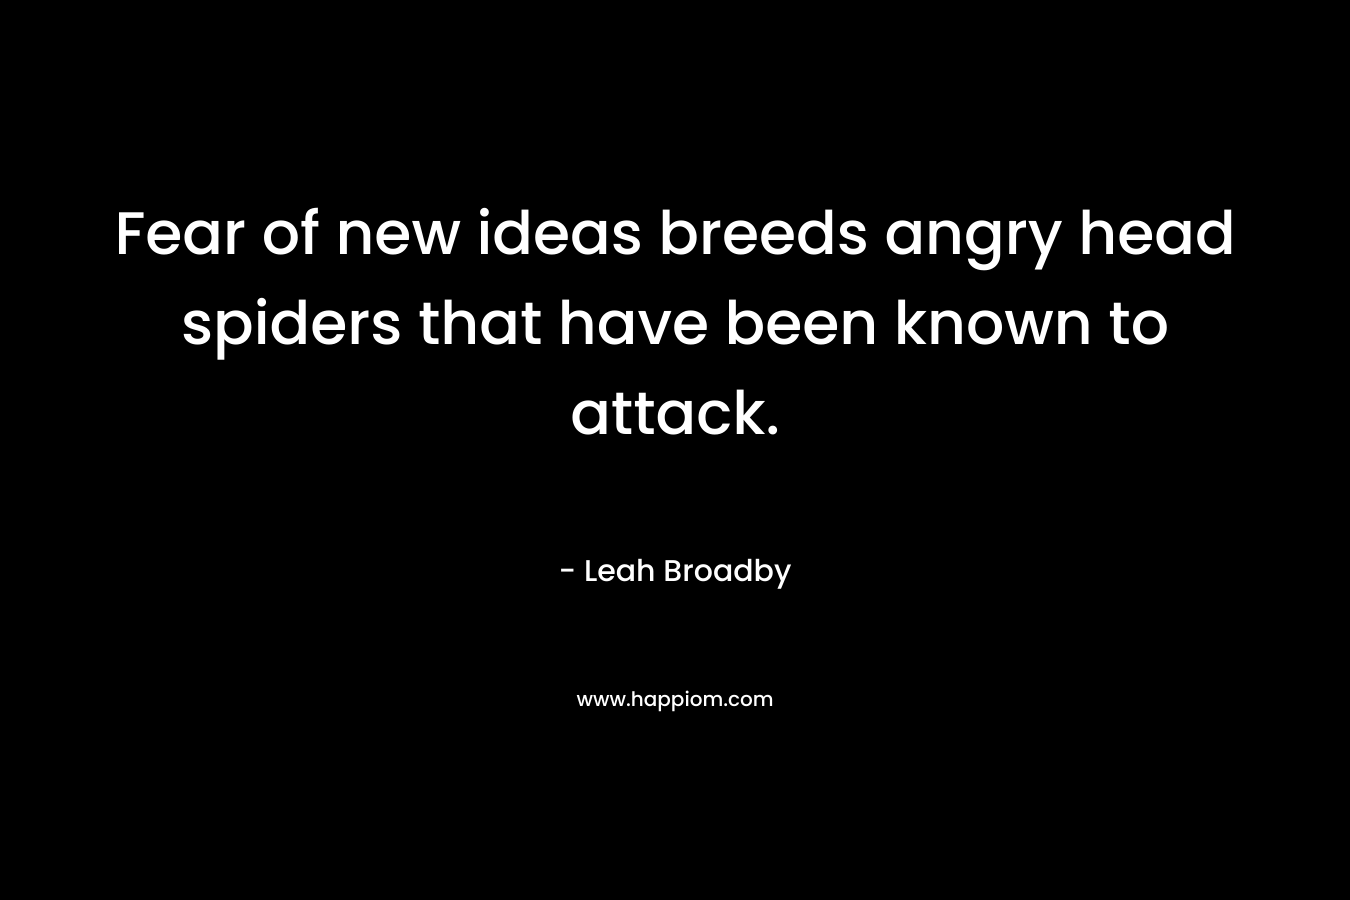 Fear of new ideas breeds angry head spiders that have been known to attack. – Leah Broadby